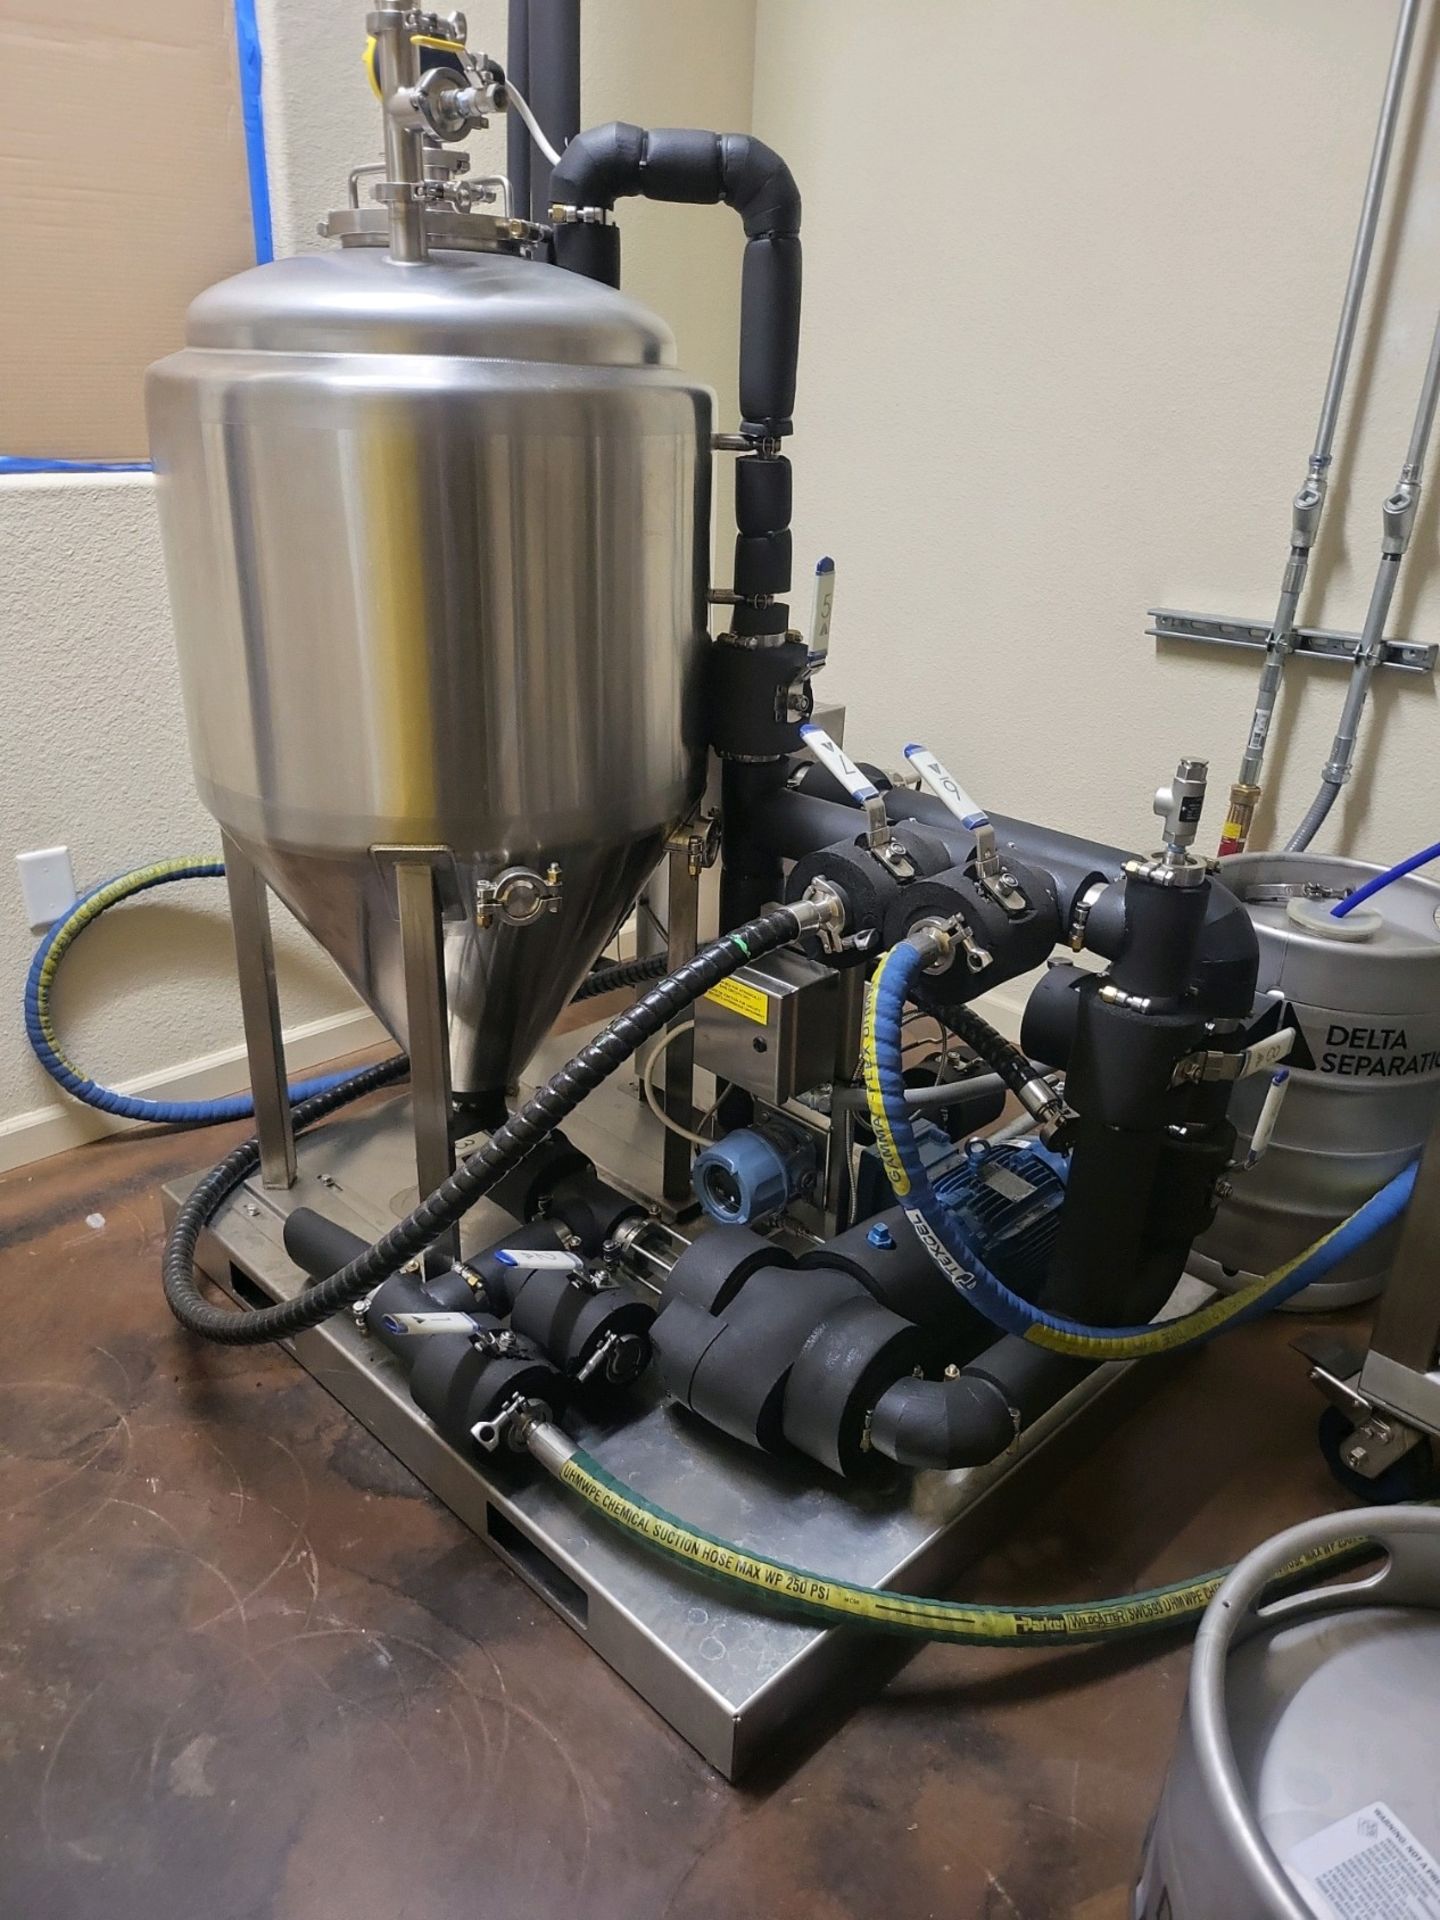 Used- Delta Separations CUP-15 Ethanol Alcohol Extraction System w/ DC-40. Model CUP 15 - Image 2 of 5